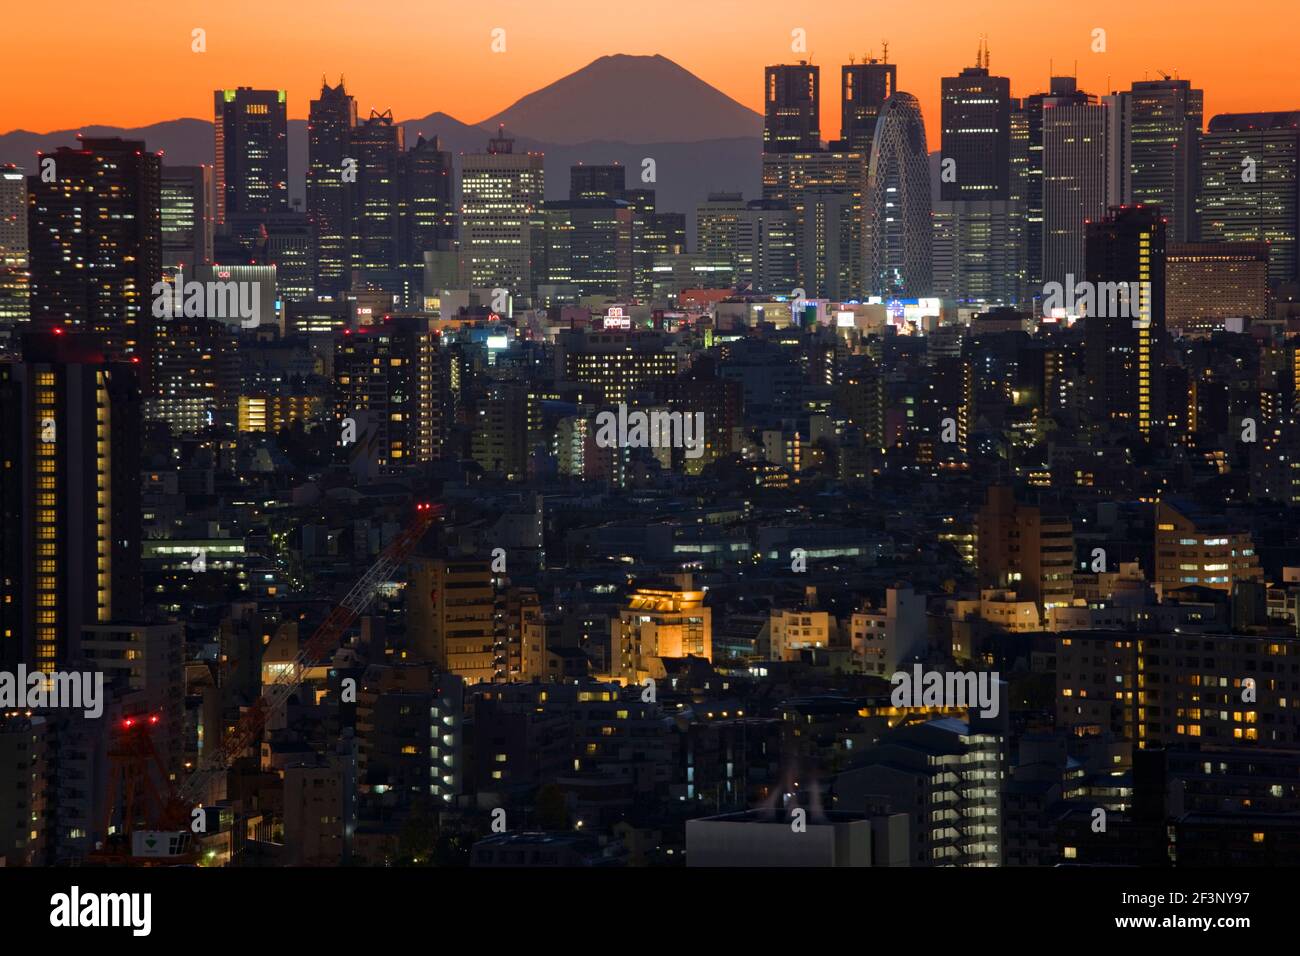 A telephoto view in clear winter twilight captures Mt. Fuji's distinctive peak rising dramatically beyond the skyscrapers (including Tokyo City Hall) Stock Photo